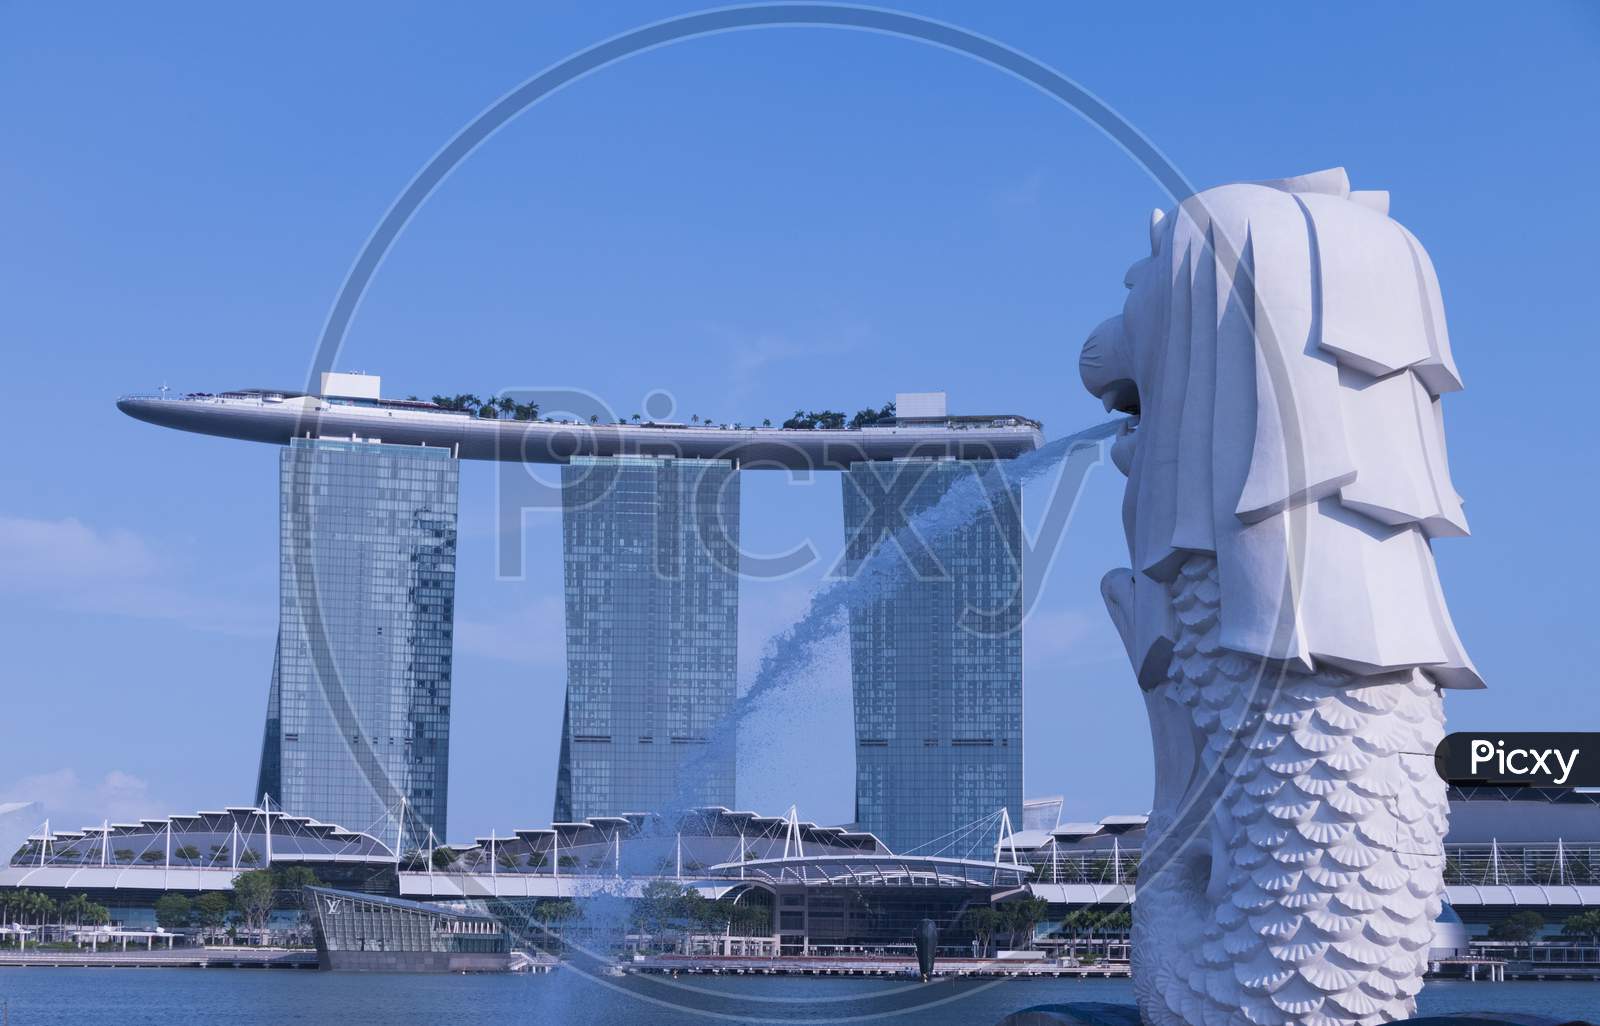 The Iconic Merlion Statue And Marina Bay